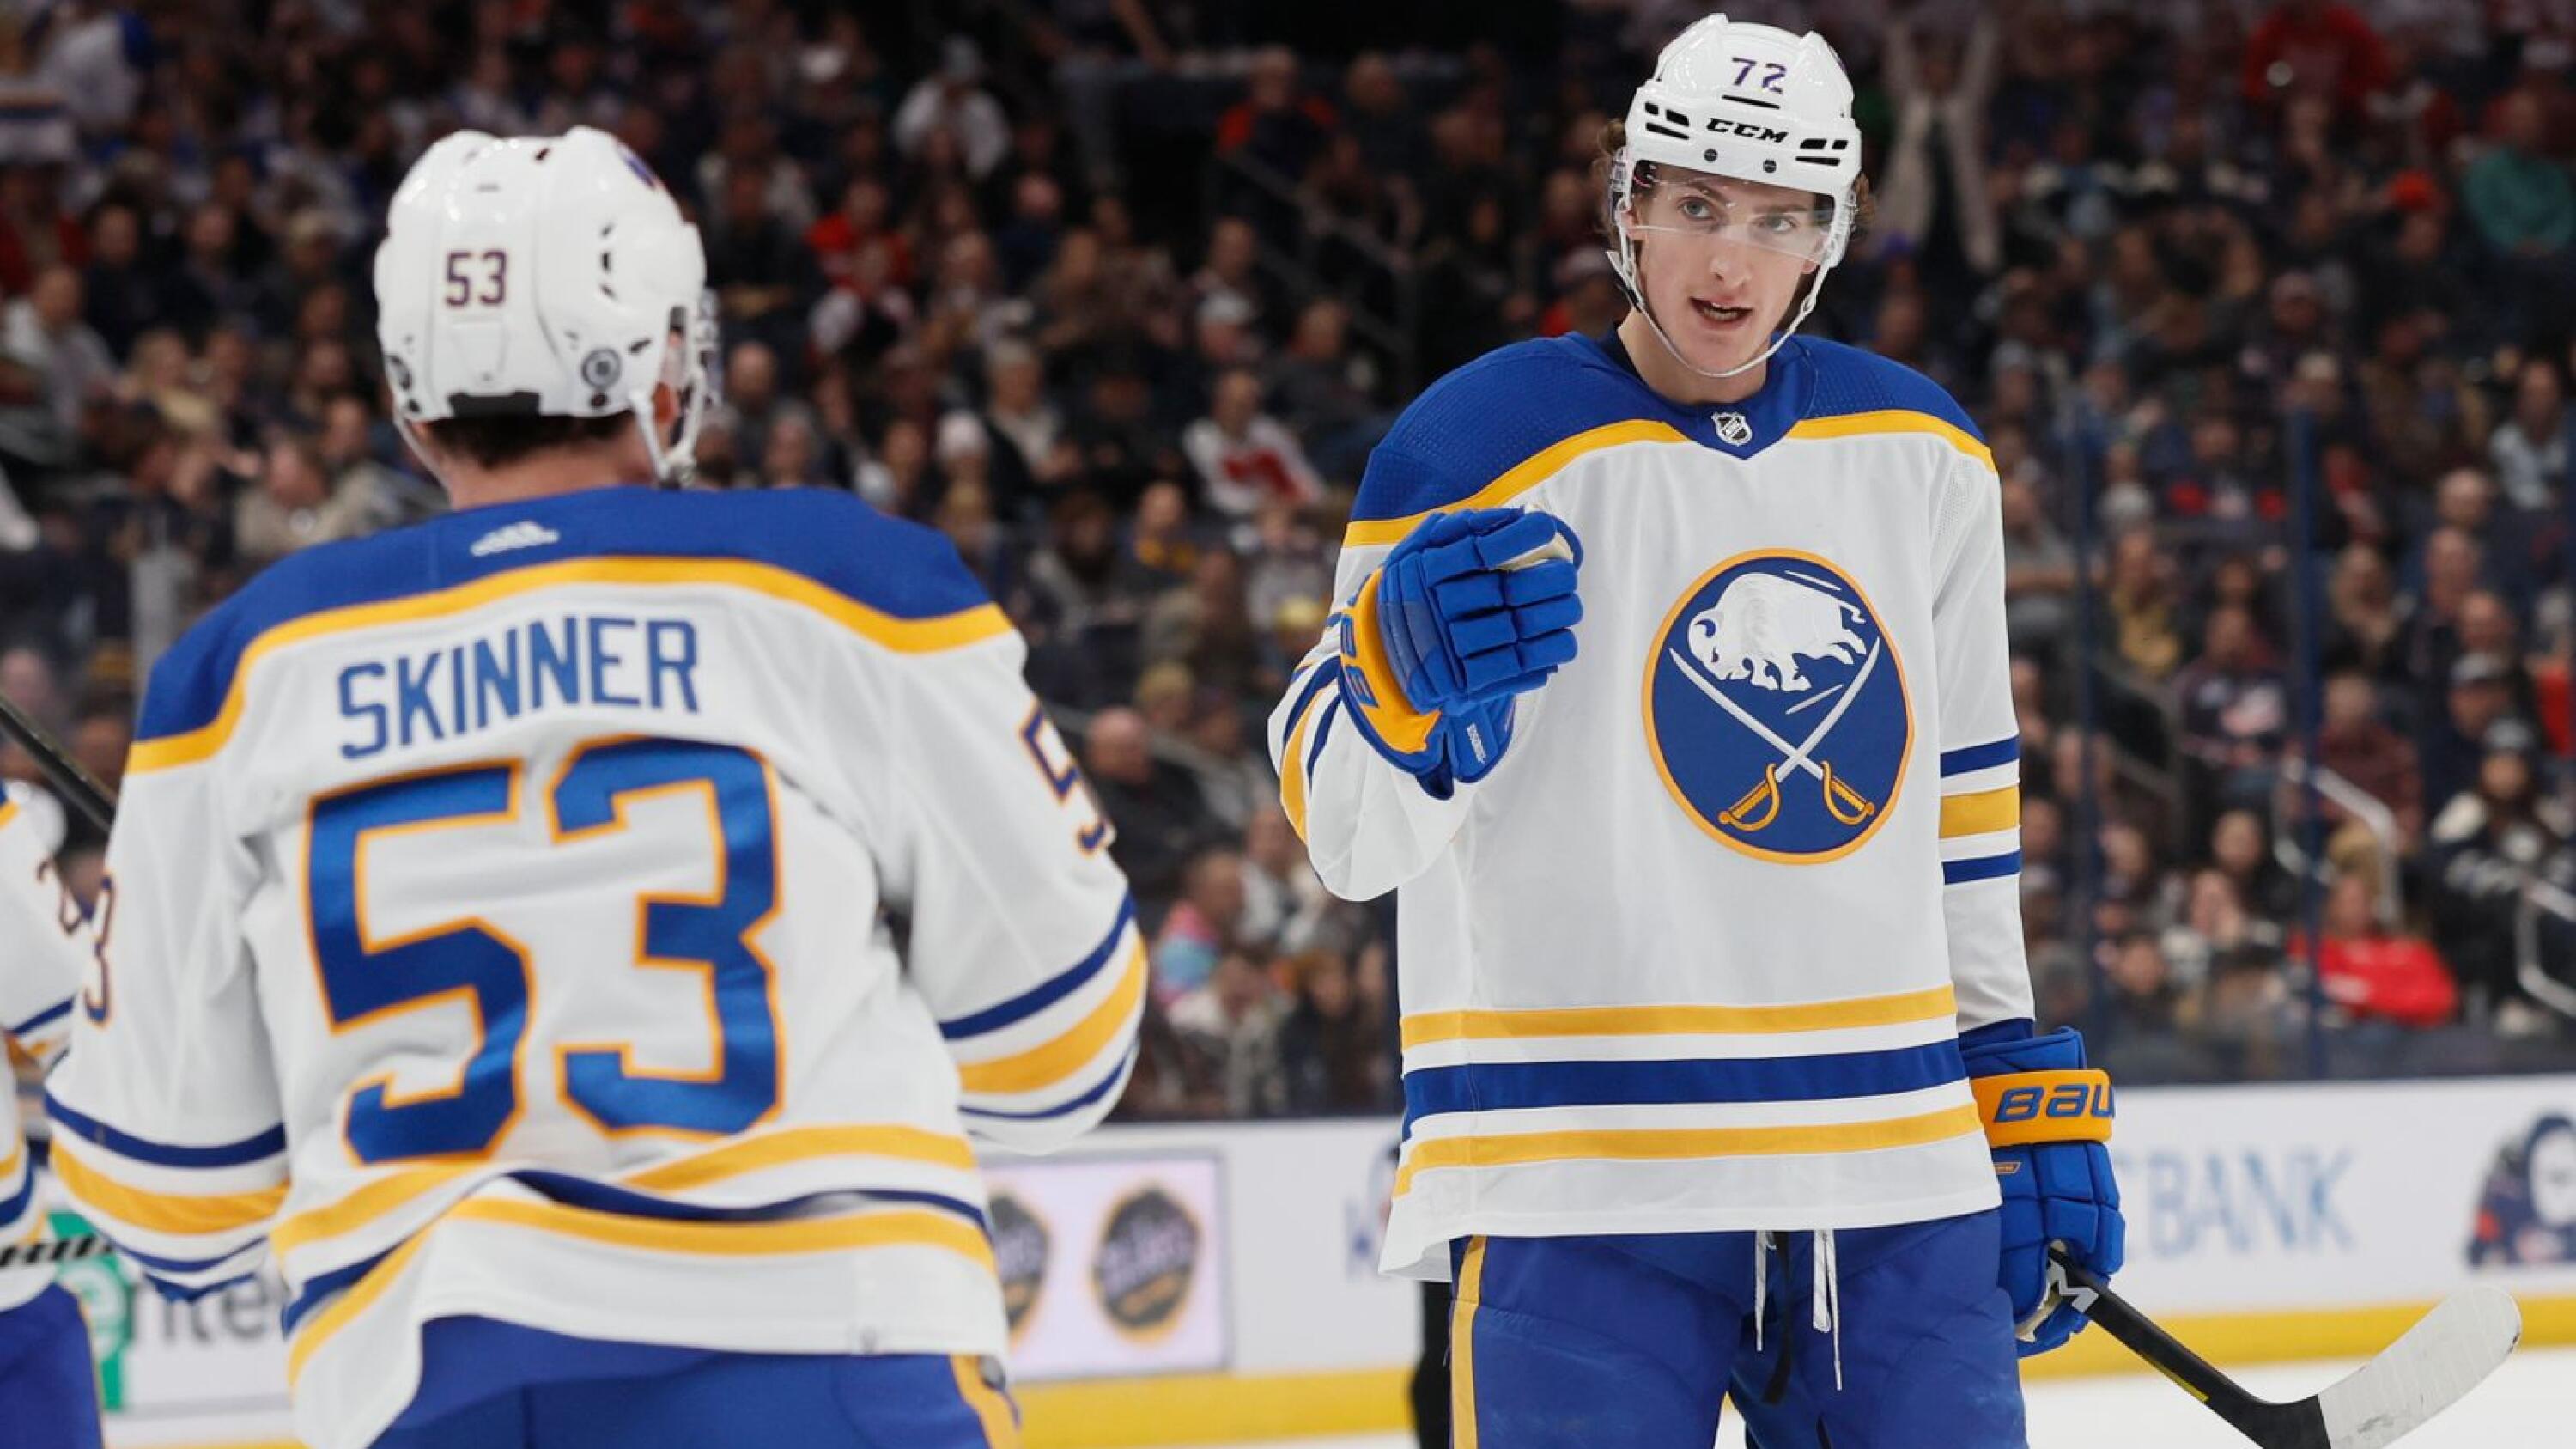 Tage Thompson among 1st round of NHL All-Star selections